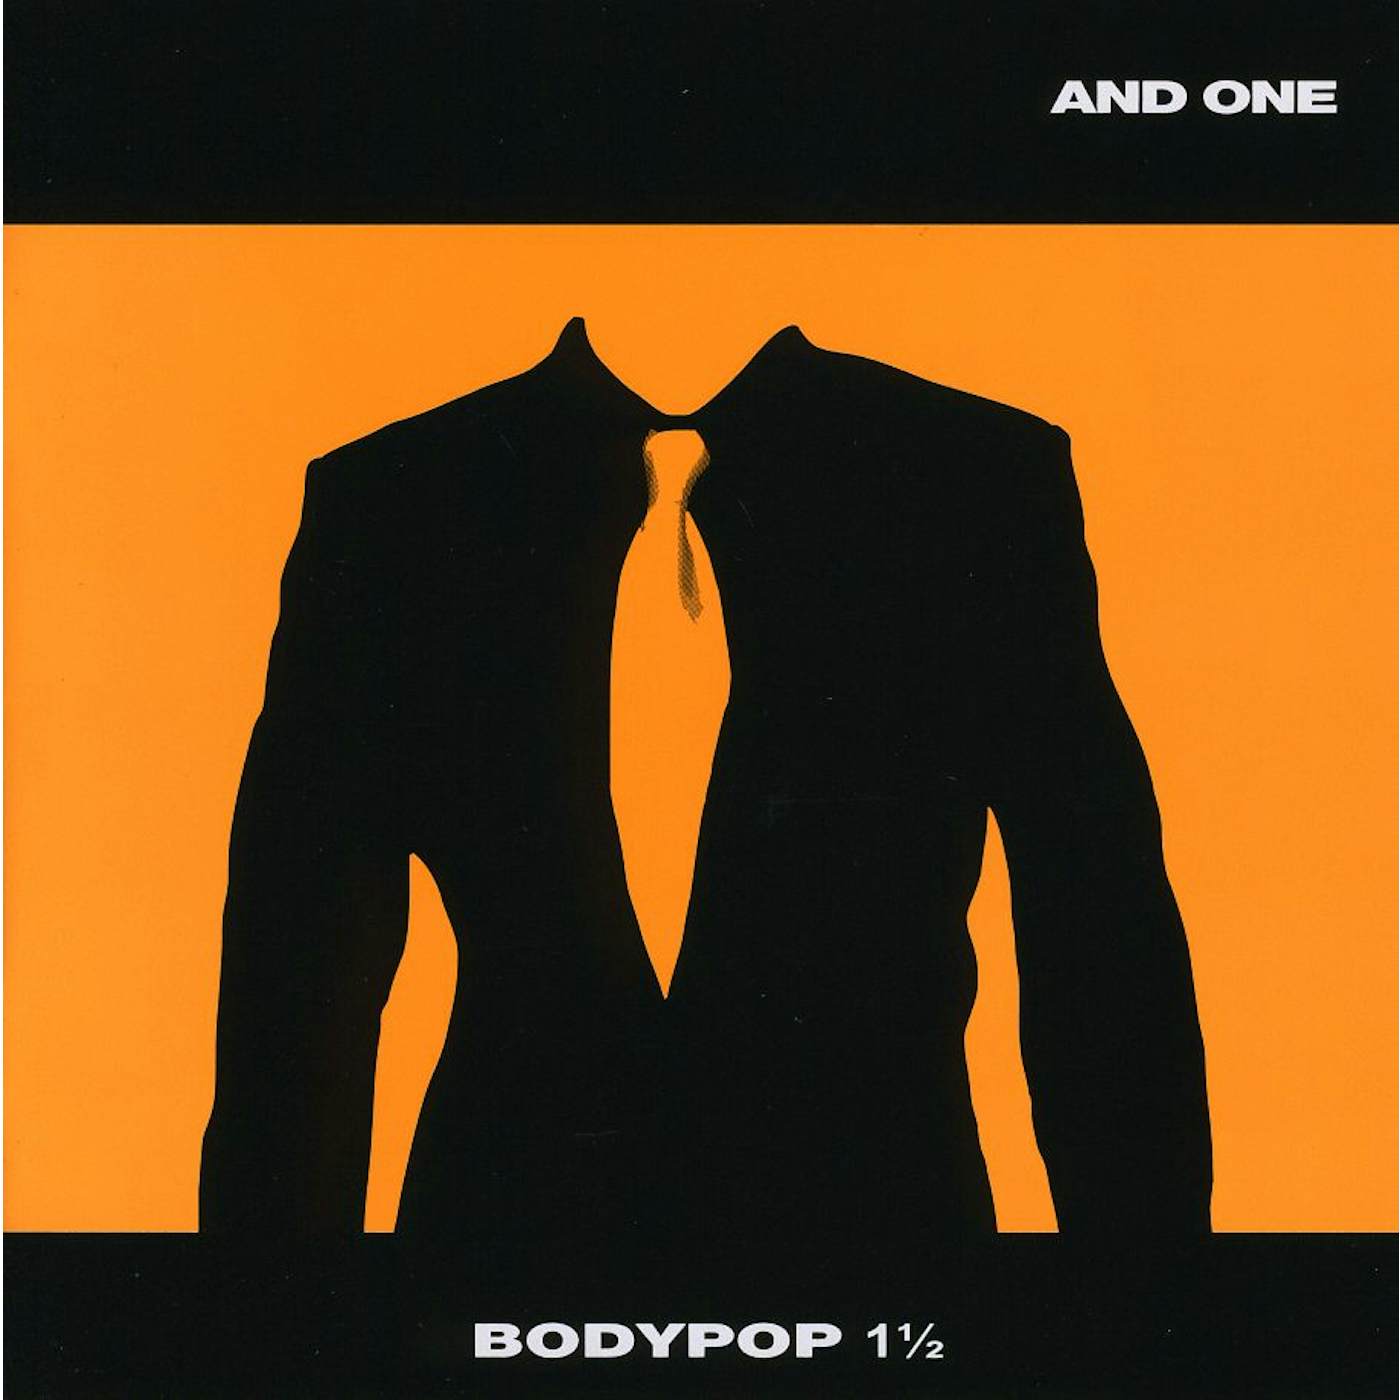 And One BODYPOP 1 1/2 CD